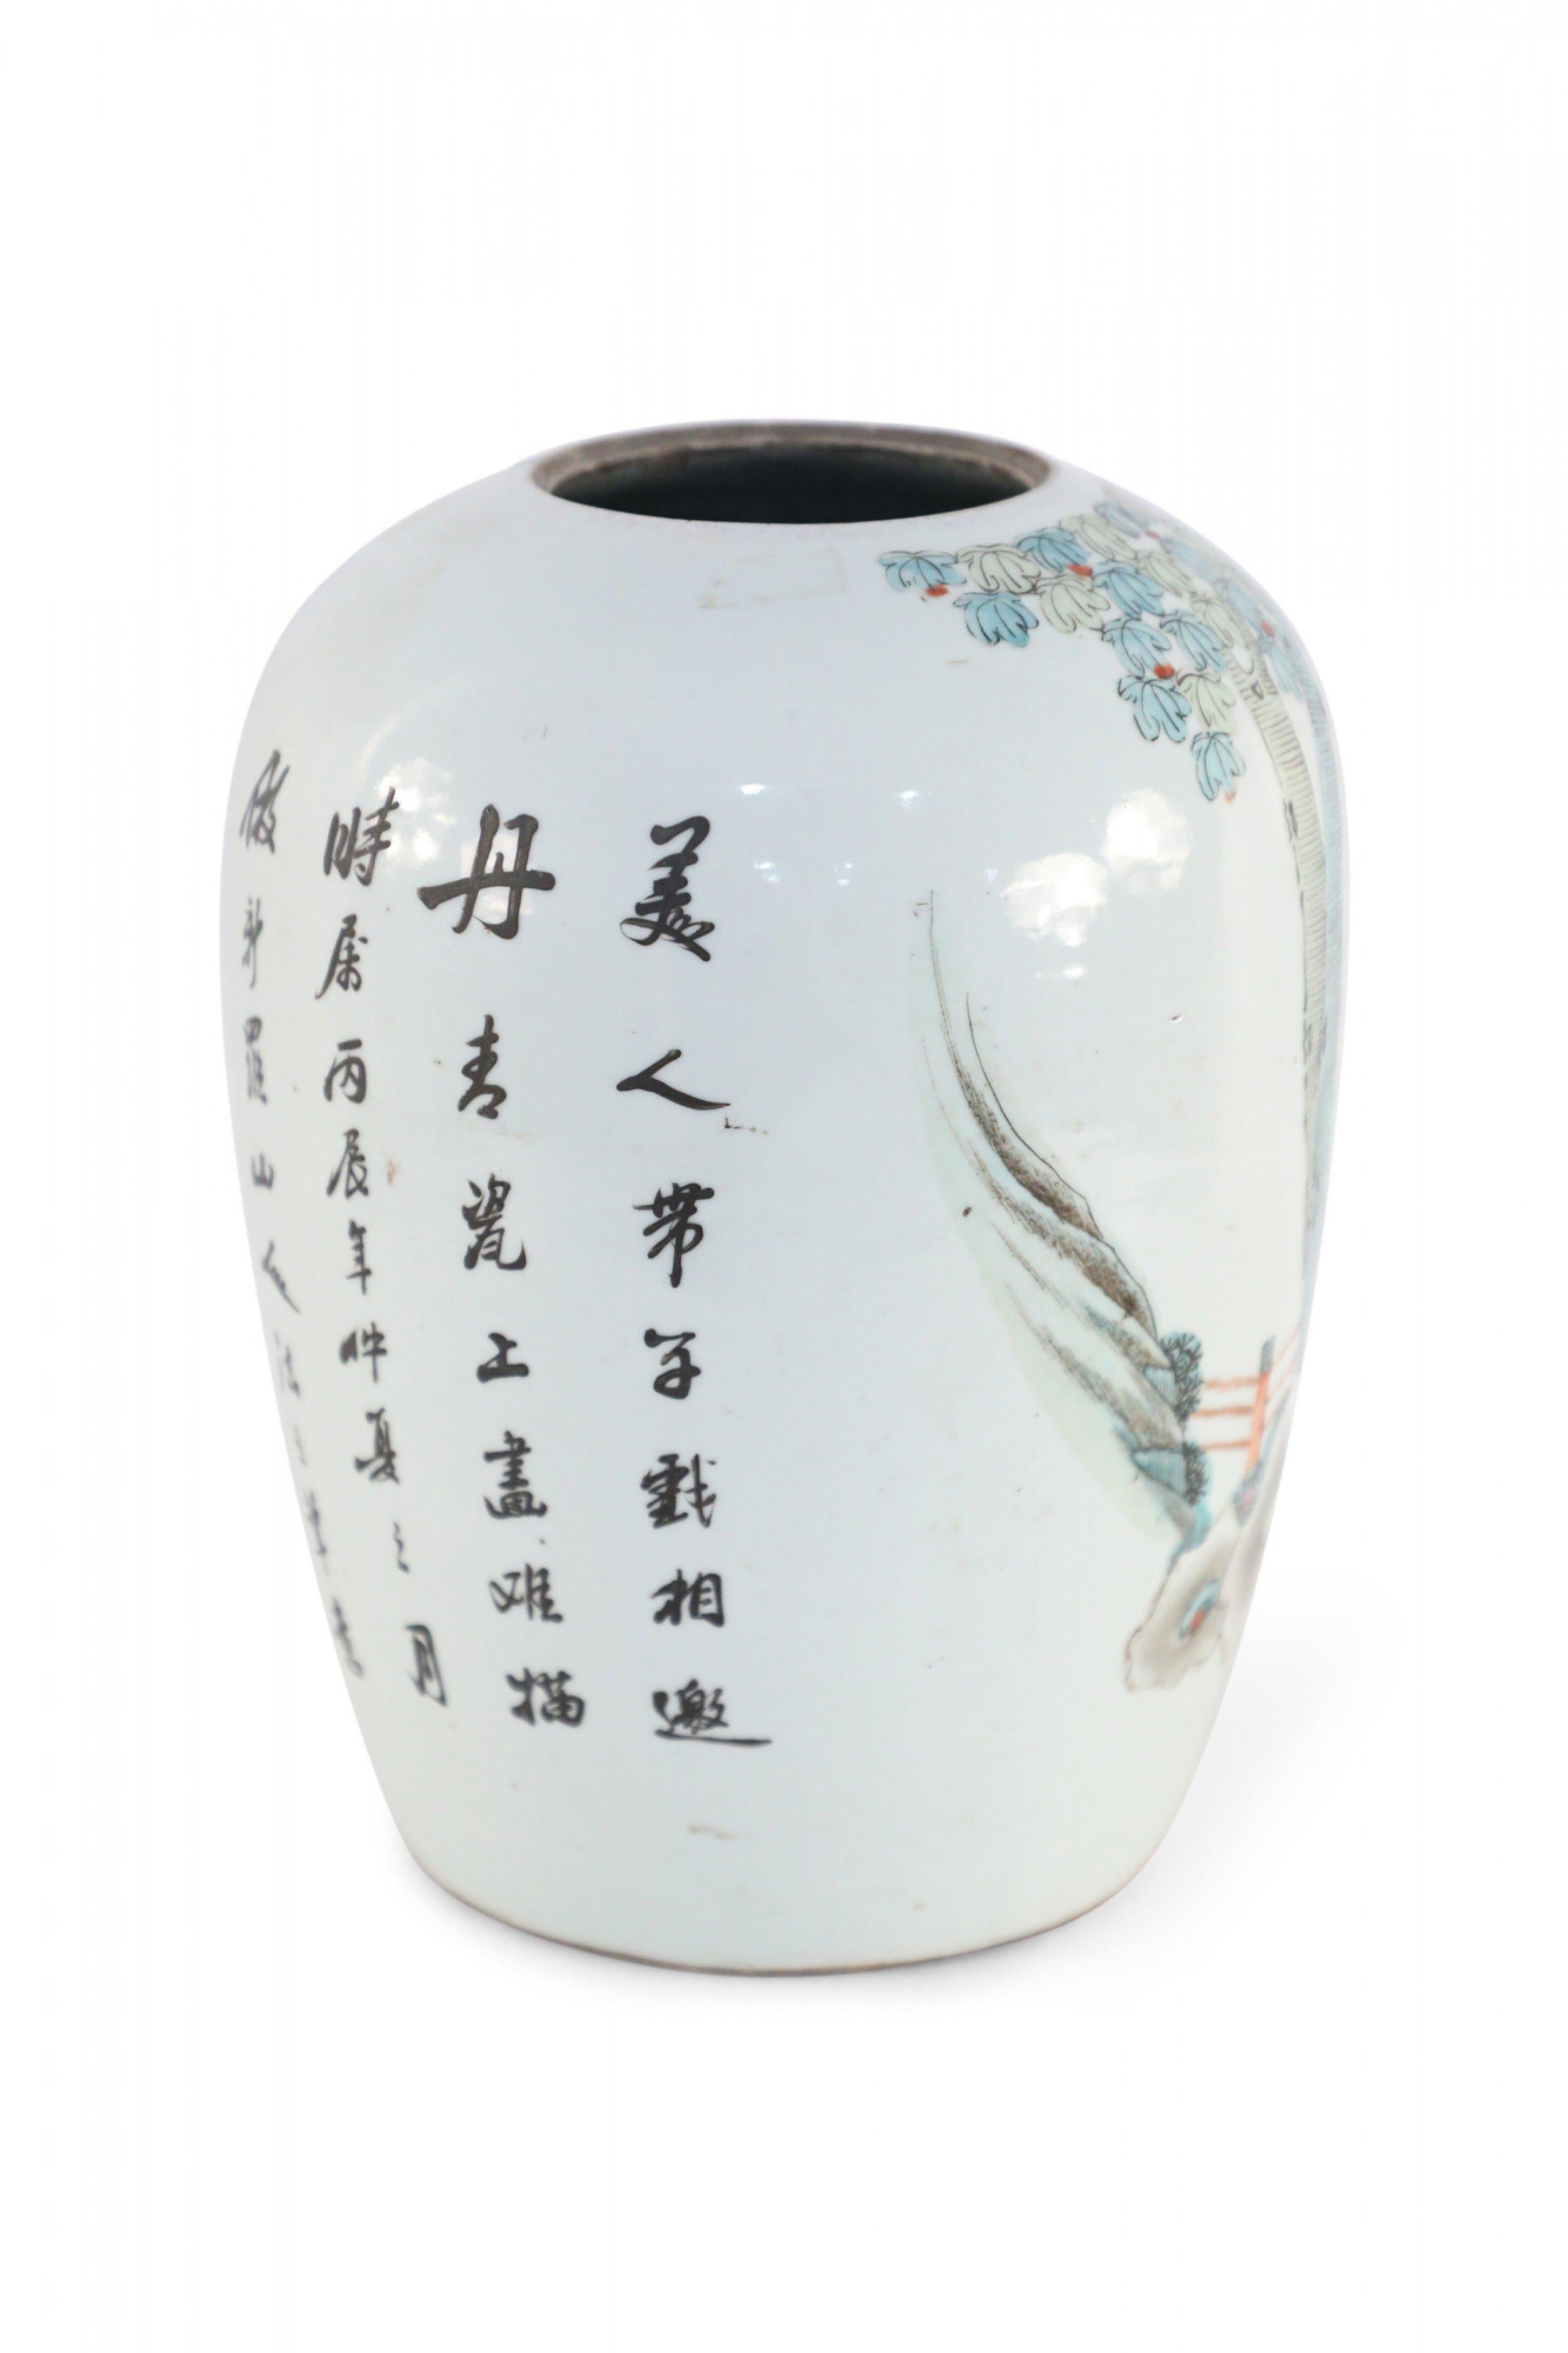 Antique Chinese (early 20th century) winter melon form white porcelain vase decorated with a gathering of women and children in a pastoral setting and characters on the reverse side.
      